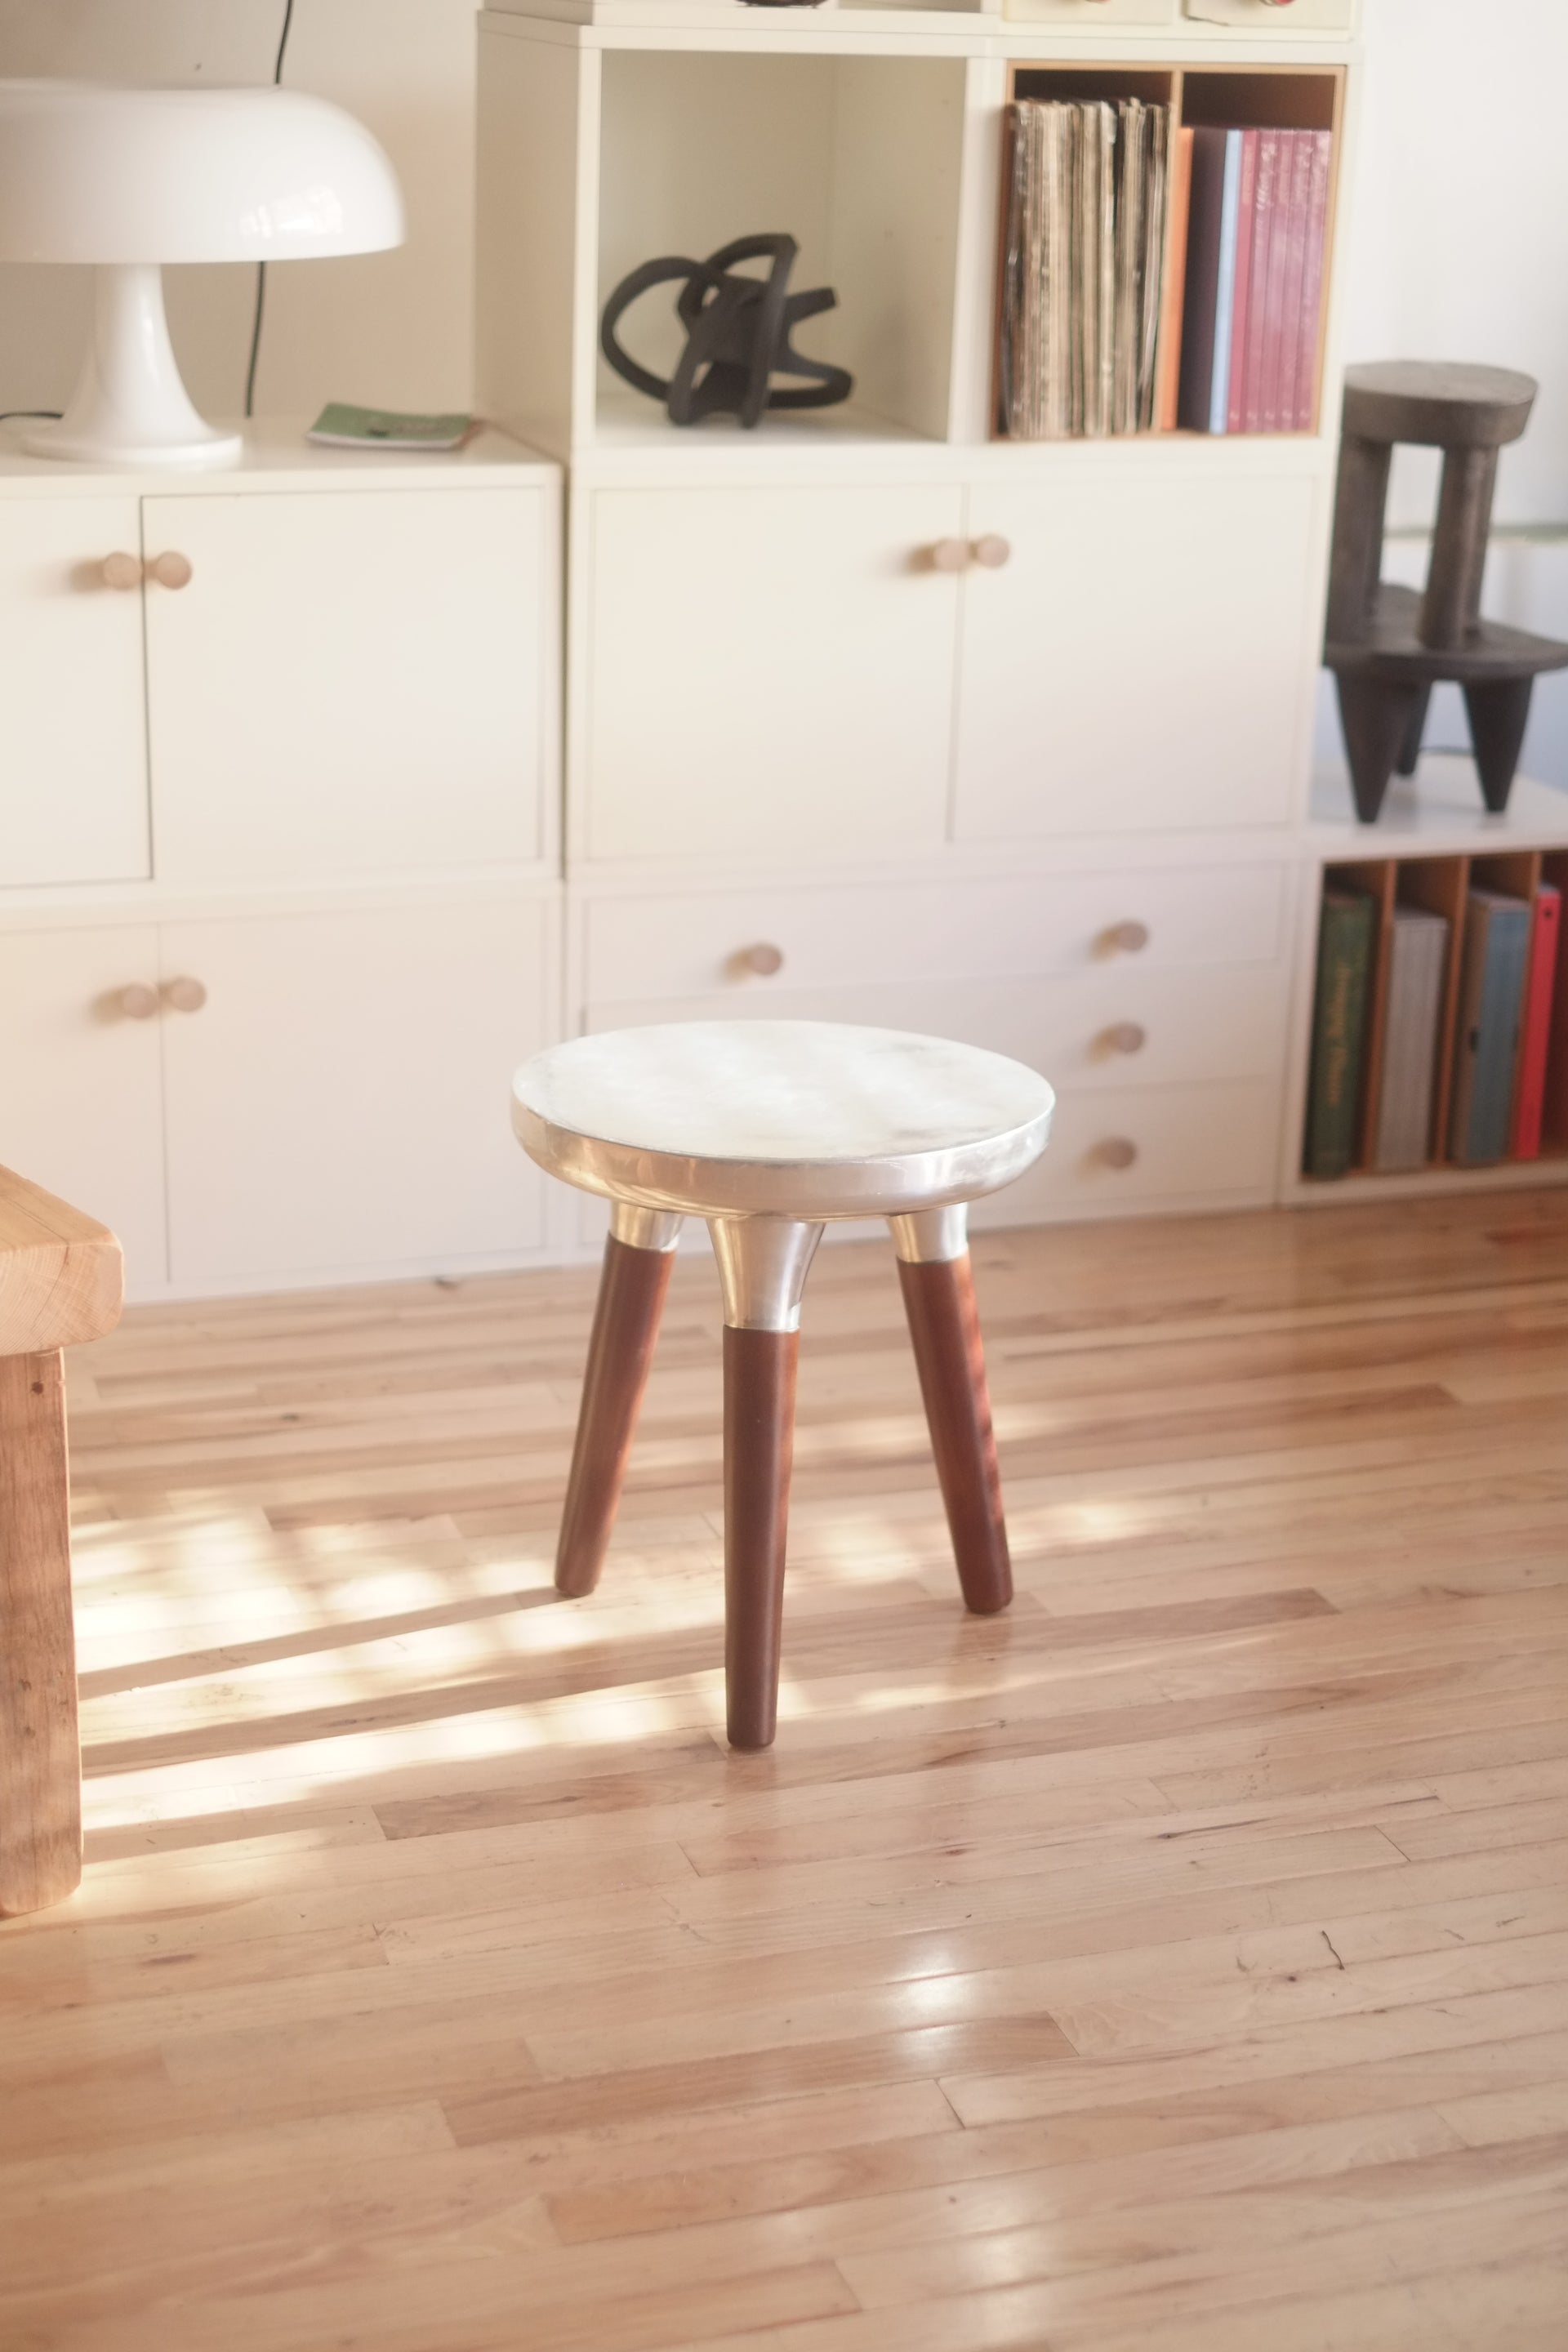 RENT: Metal and wood tripod side table/ stool